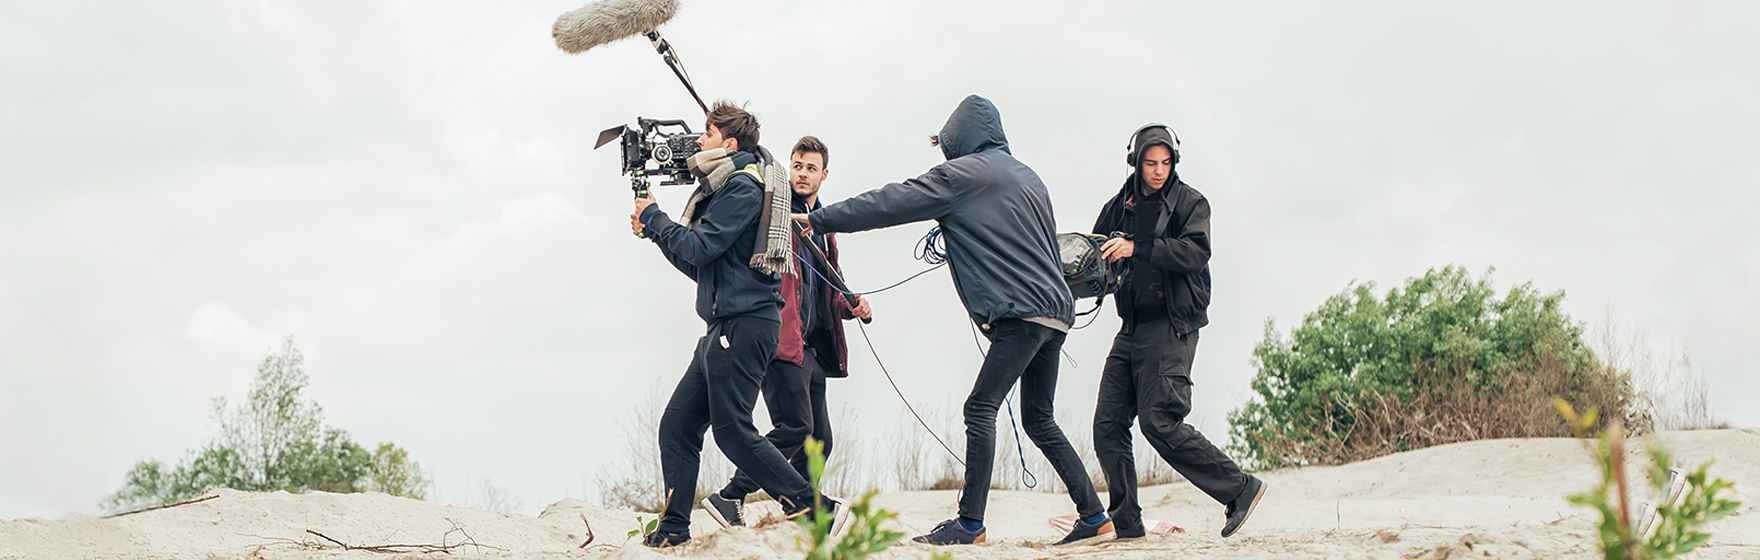 Behind the scene. Film crew team filming a scene on outdoor location